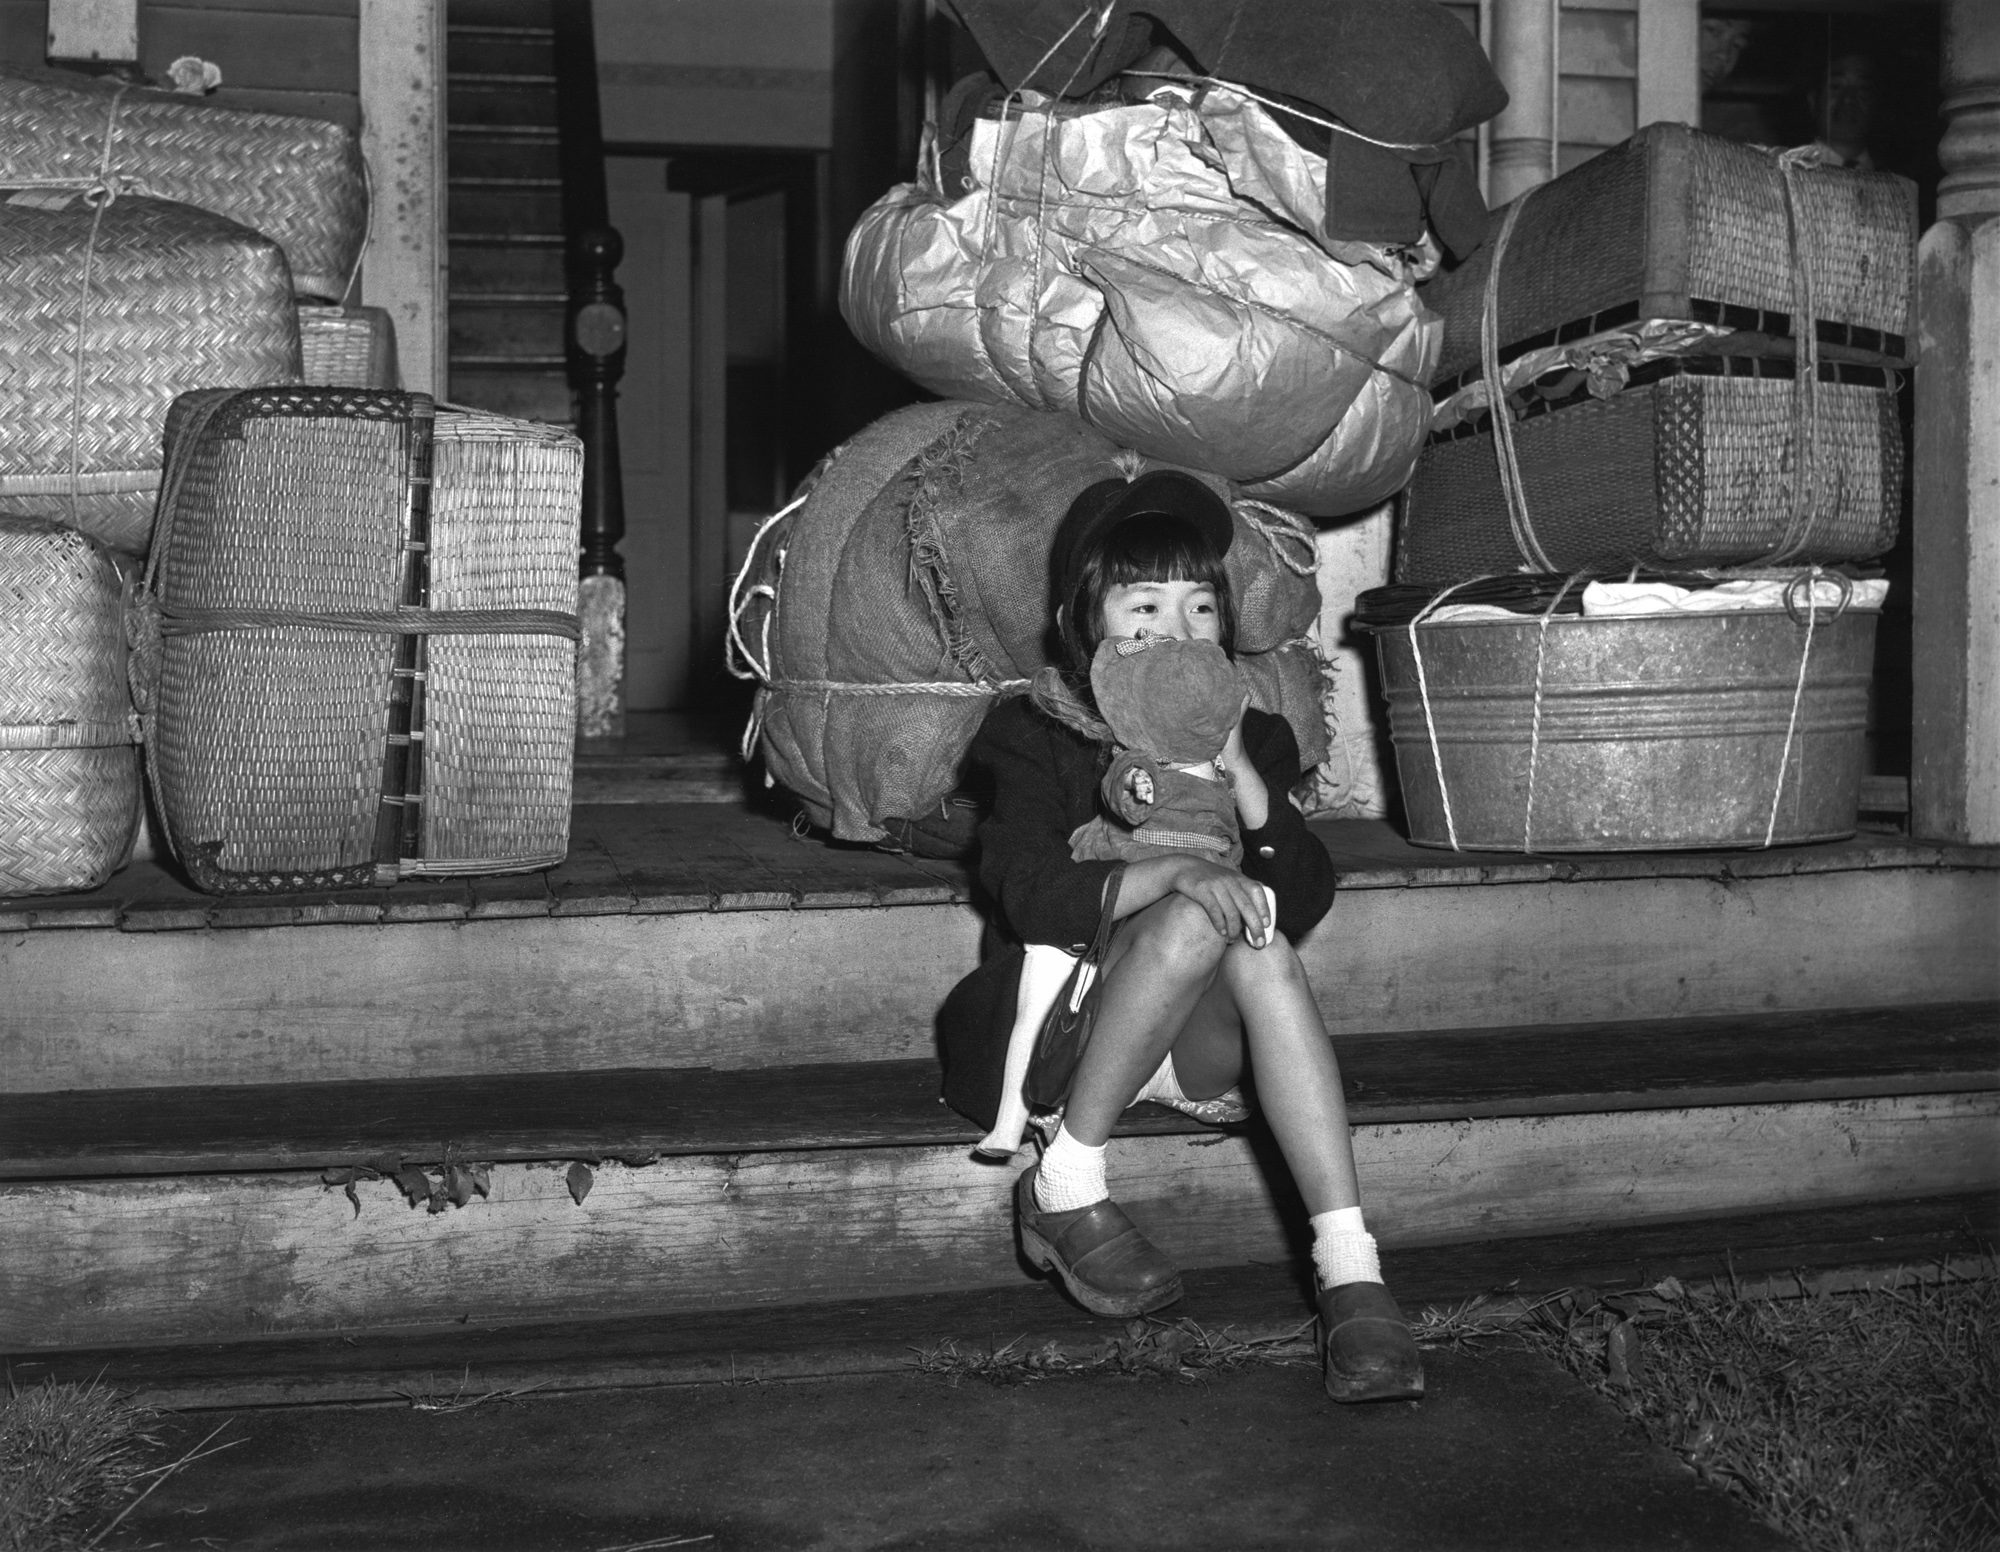 A little girl sits on the front steps of a house, clutching a doll, and surrounded by stuffed wicker baskets, wash tubs and other bundles of belongings ready for transport